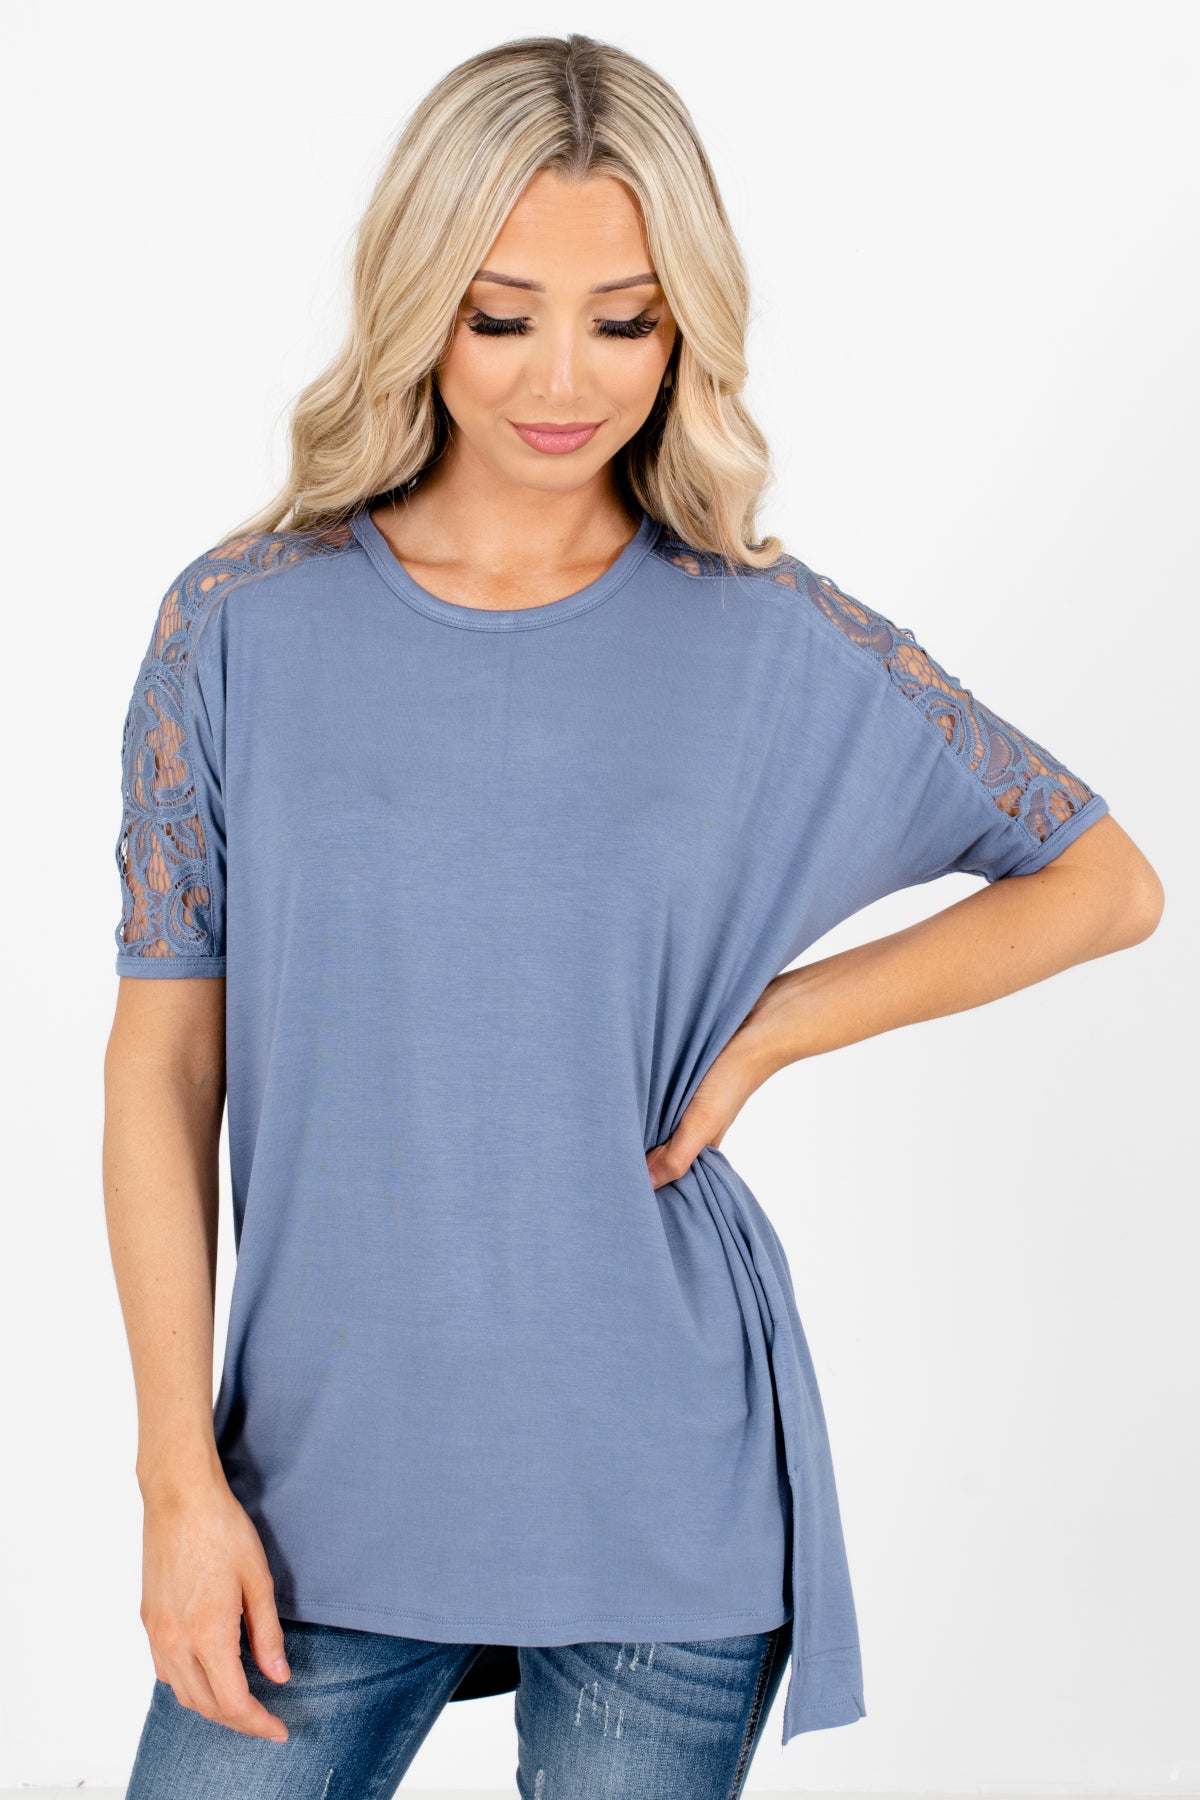 Blue Lace Detailed Boutique Tops for Women